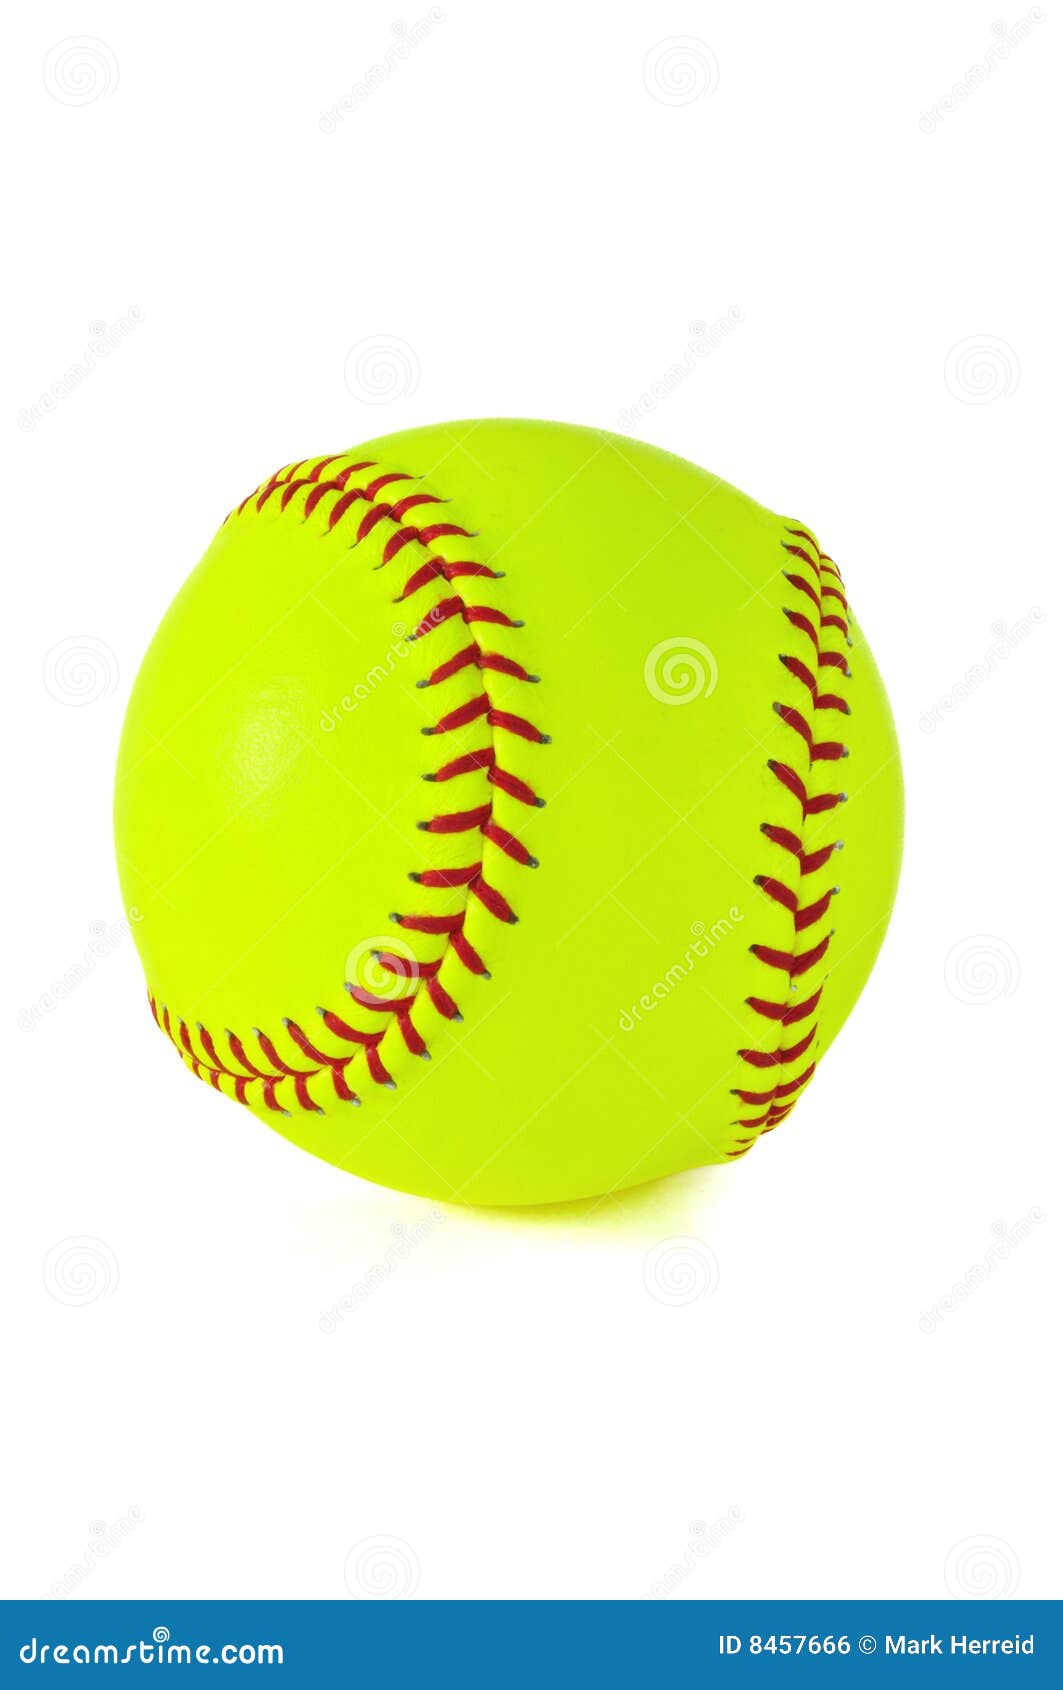 clipart backgrounds softball - photo #10